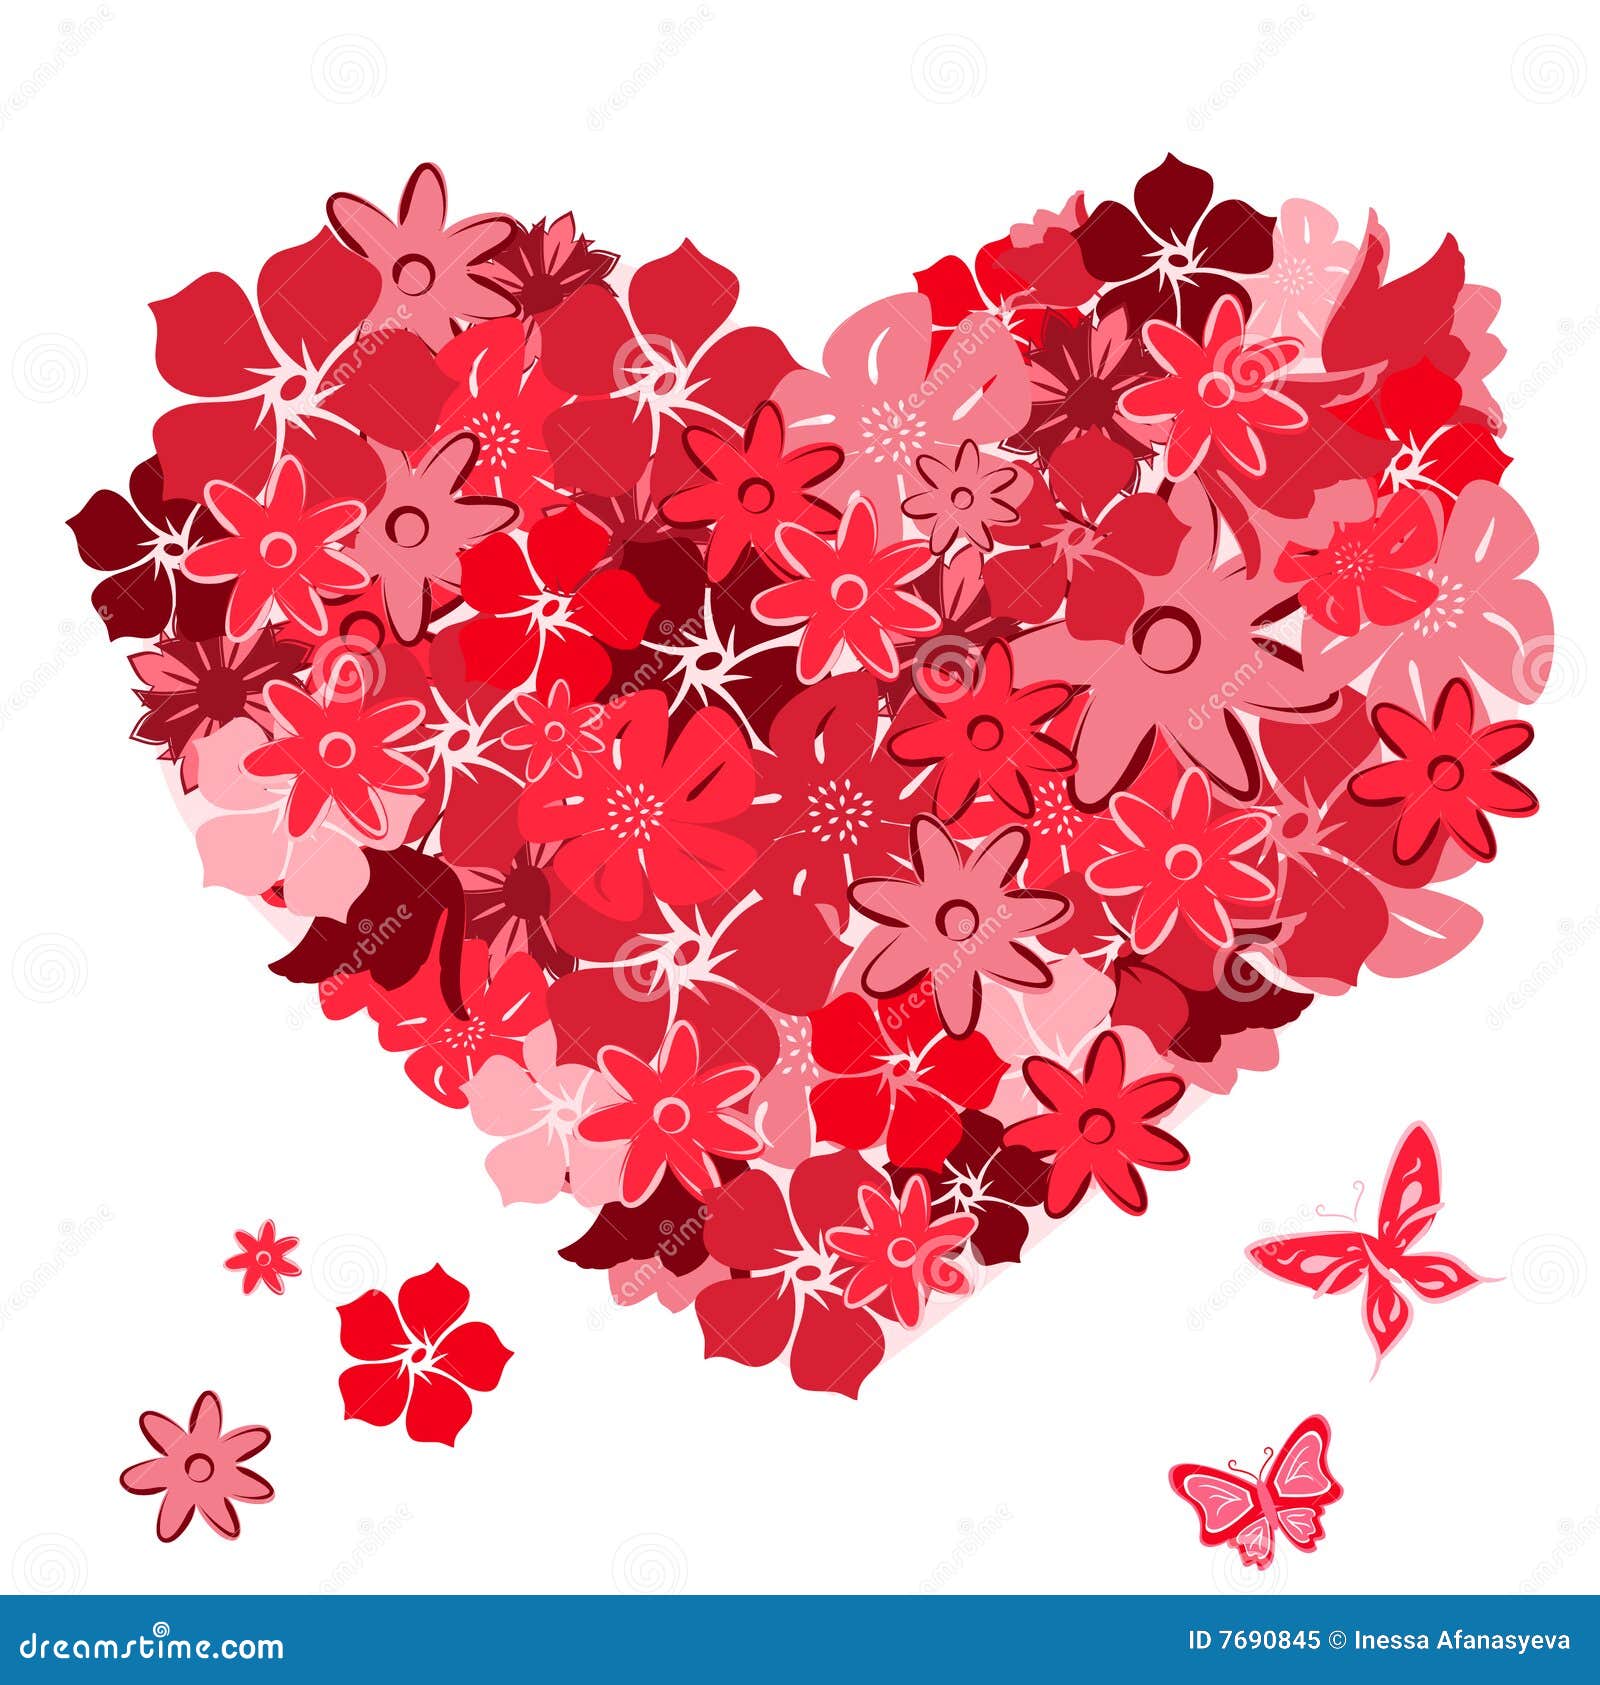 Floral Heart with Butterflies Stock Vector - Illustration of glamour ...